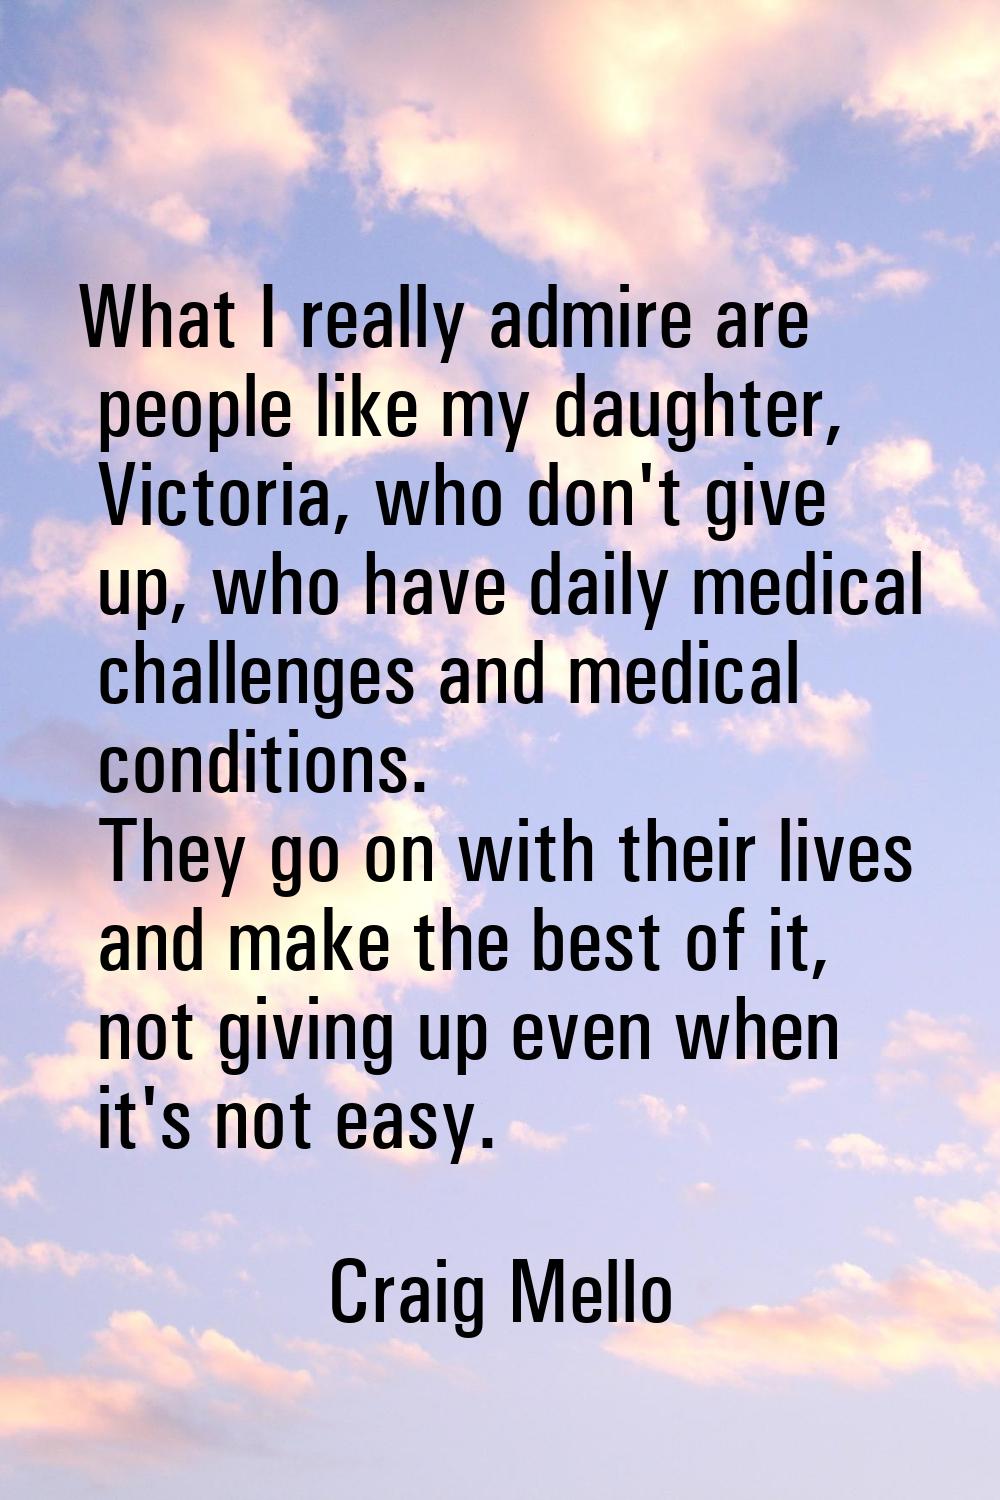 What I really admire are people like my daughter, Victoria, who don't give up, who have daily medic